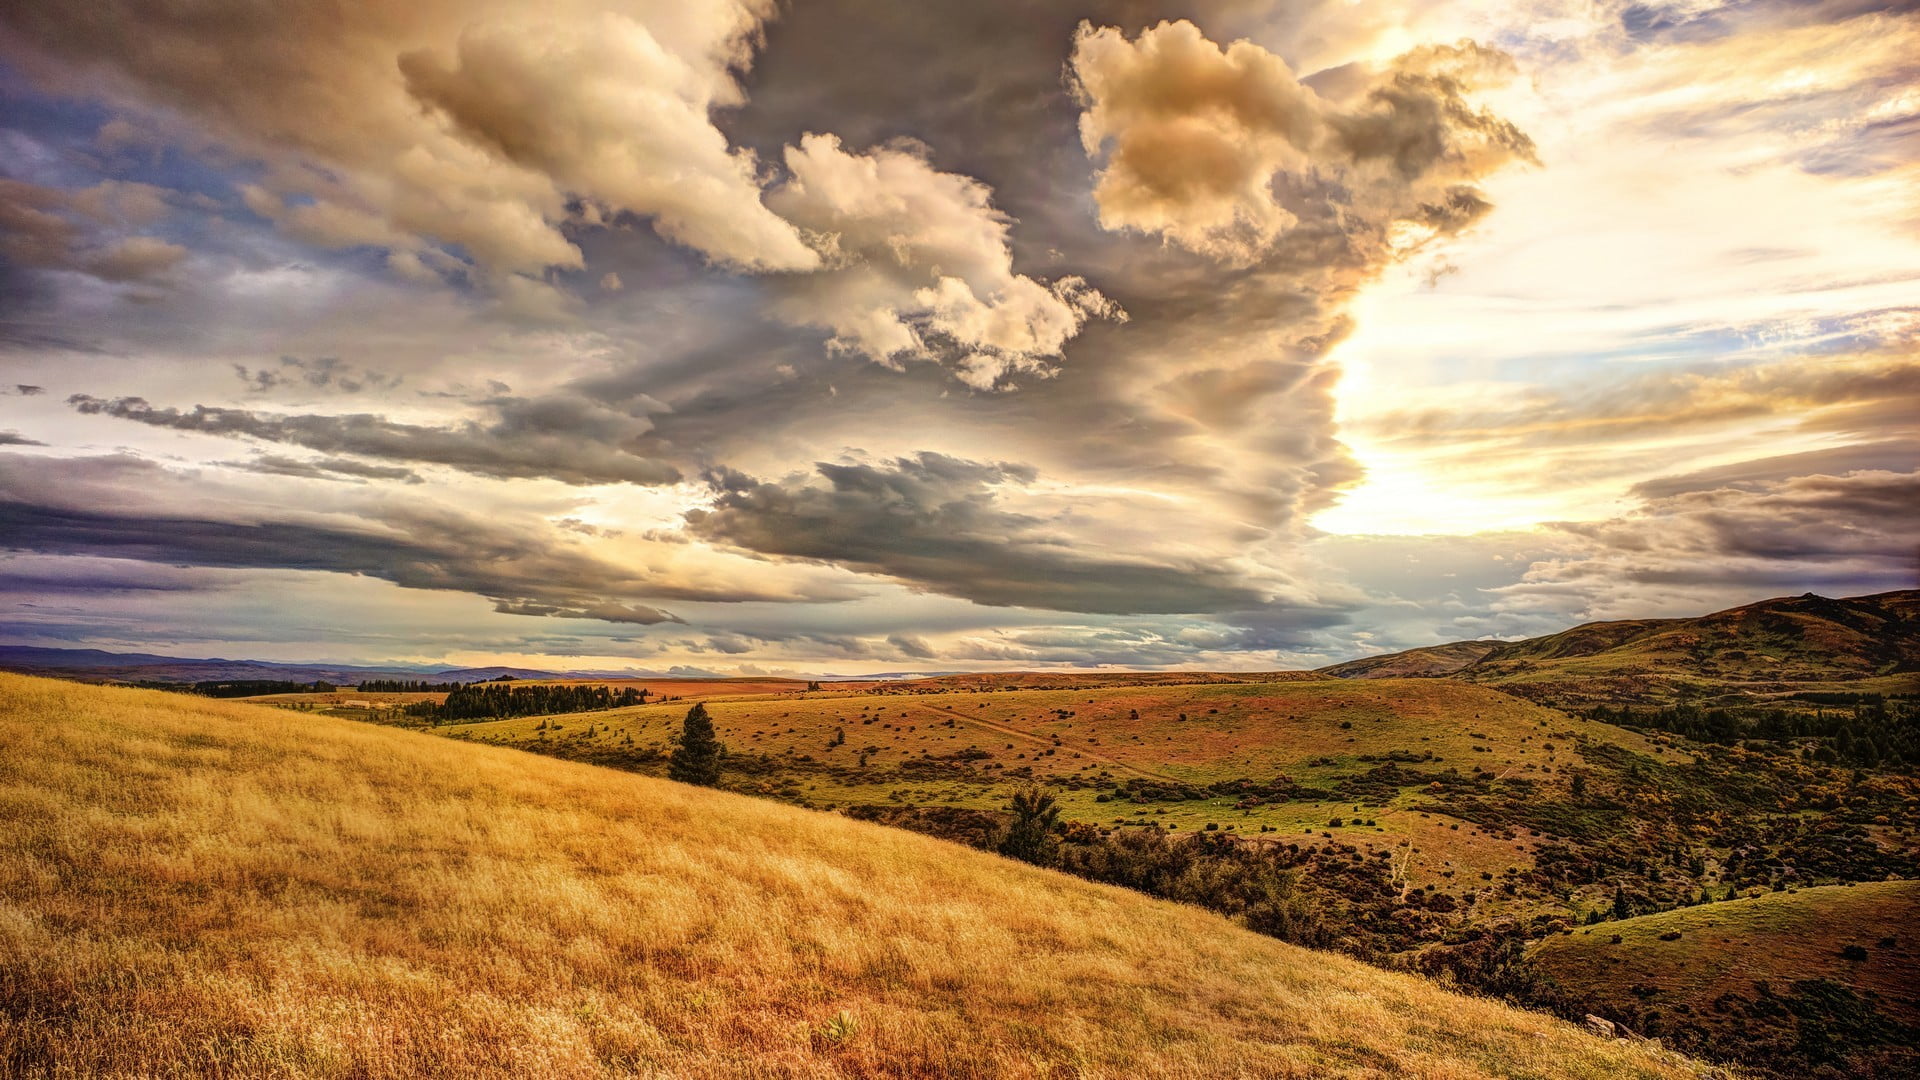 brown dried grass field, landscape, sky, clouds, nature, Central Otago